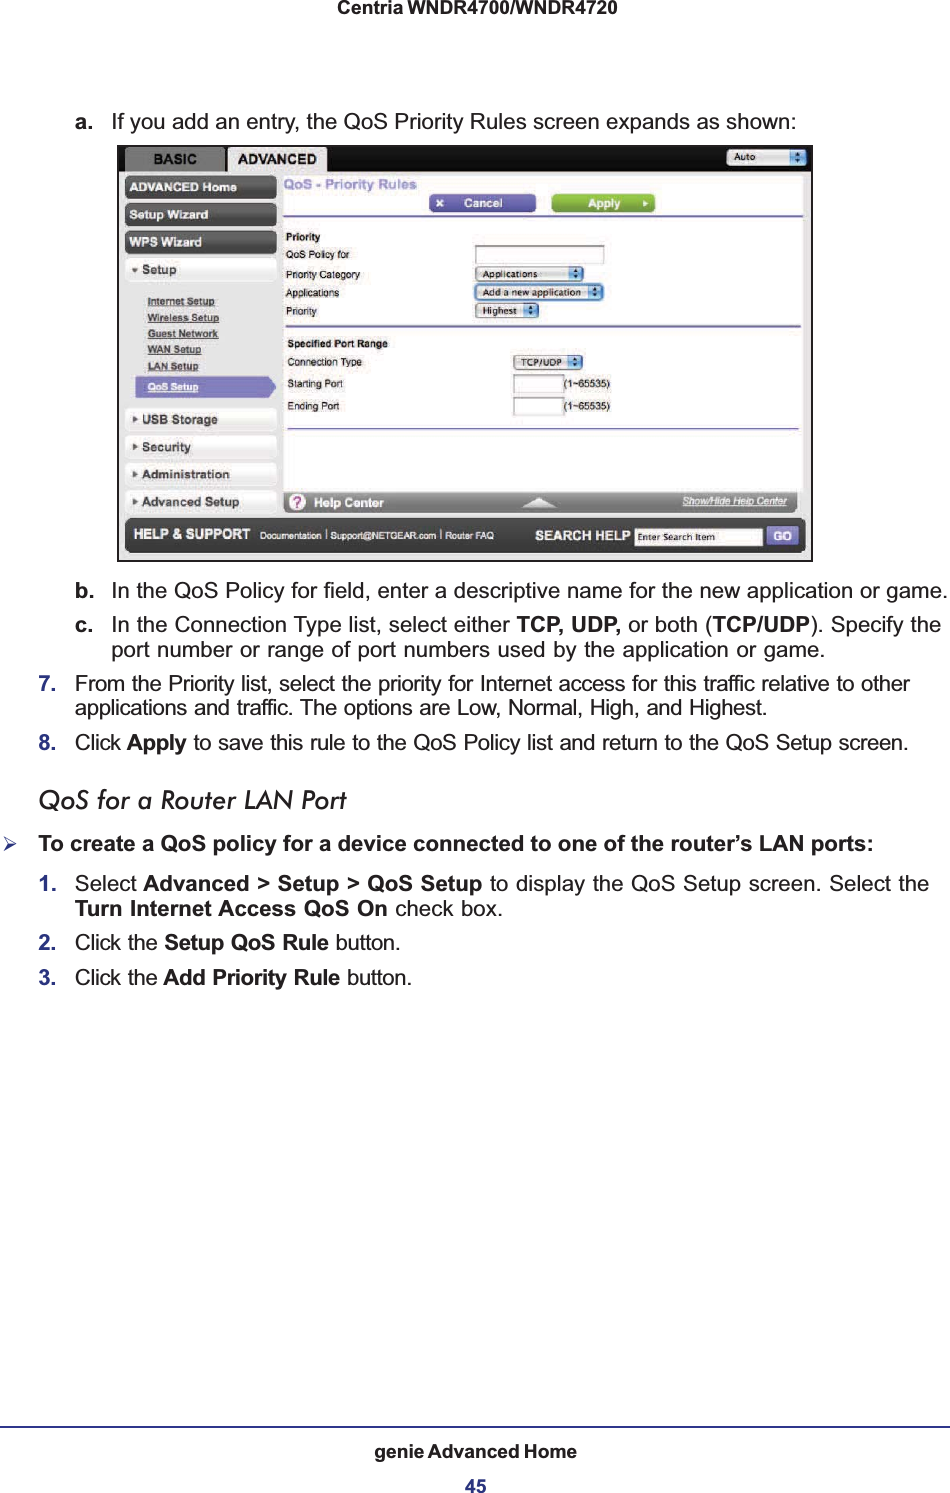 genie Advanced Home45 Centria WNDR4700/WNDR4720a. If you add an entry, the QoS Priority Rules screen expands as shown: b. In the QoS Policy for field, enter a descriptive name for the new application or game.c. In the Connection Type list, select either TCP, UDP, or both (TCP/UDP). Specify the port number or range of port numbers used by the application or game.7. From the Priority list, select the priority for Internet access for this traffic relative to other applications and traffic. The options are Low, Normal, High, and Highest.8. Click Apply to save this rule to the QoS Policy list and return to the QoS Setup screen.QoS for a Router LAN Port¾To create a QoS policy for a device connected to one of the router’s LAN ports:1. Select Advanced &gt; Setup &gt; QoS Setup to display the QoS Setup screen. Select the Turn Internet Access QoS On check box.2. Click the Setup QoS Rule button.3. Click the Add Priority Rule button.